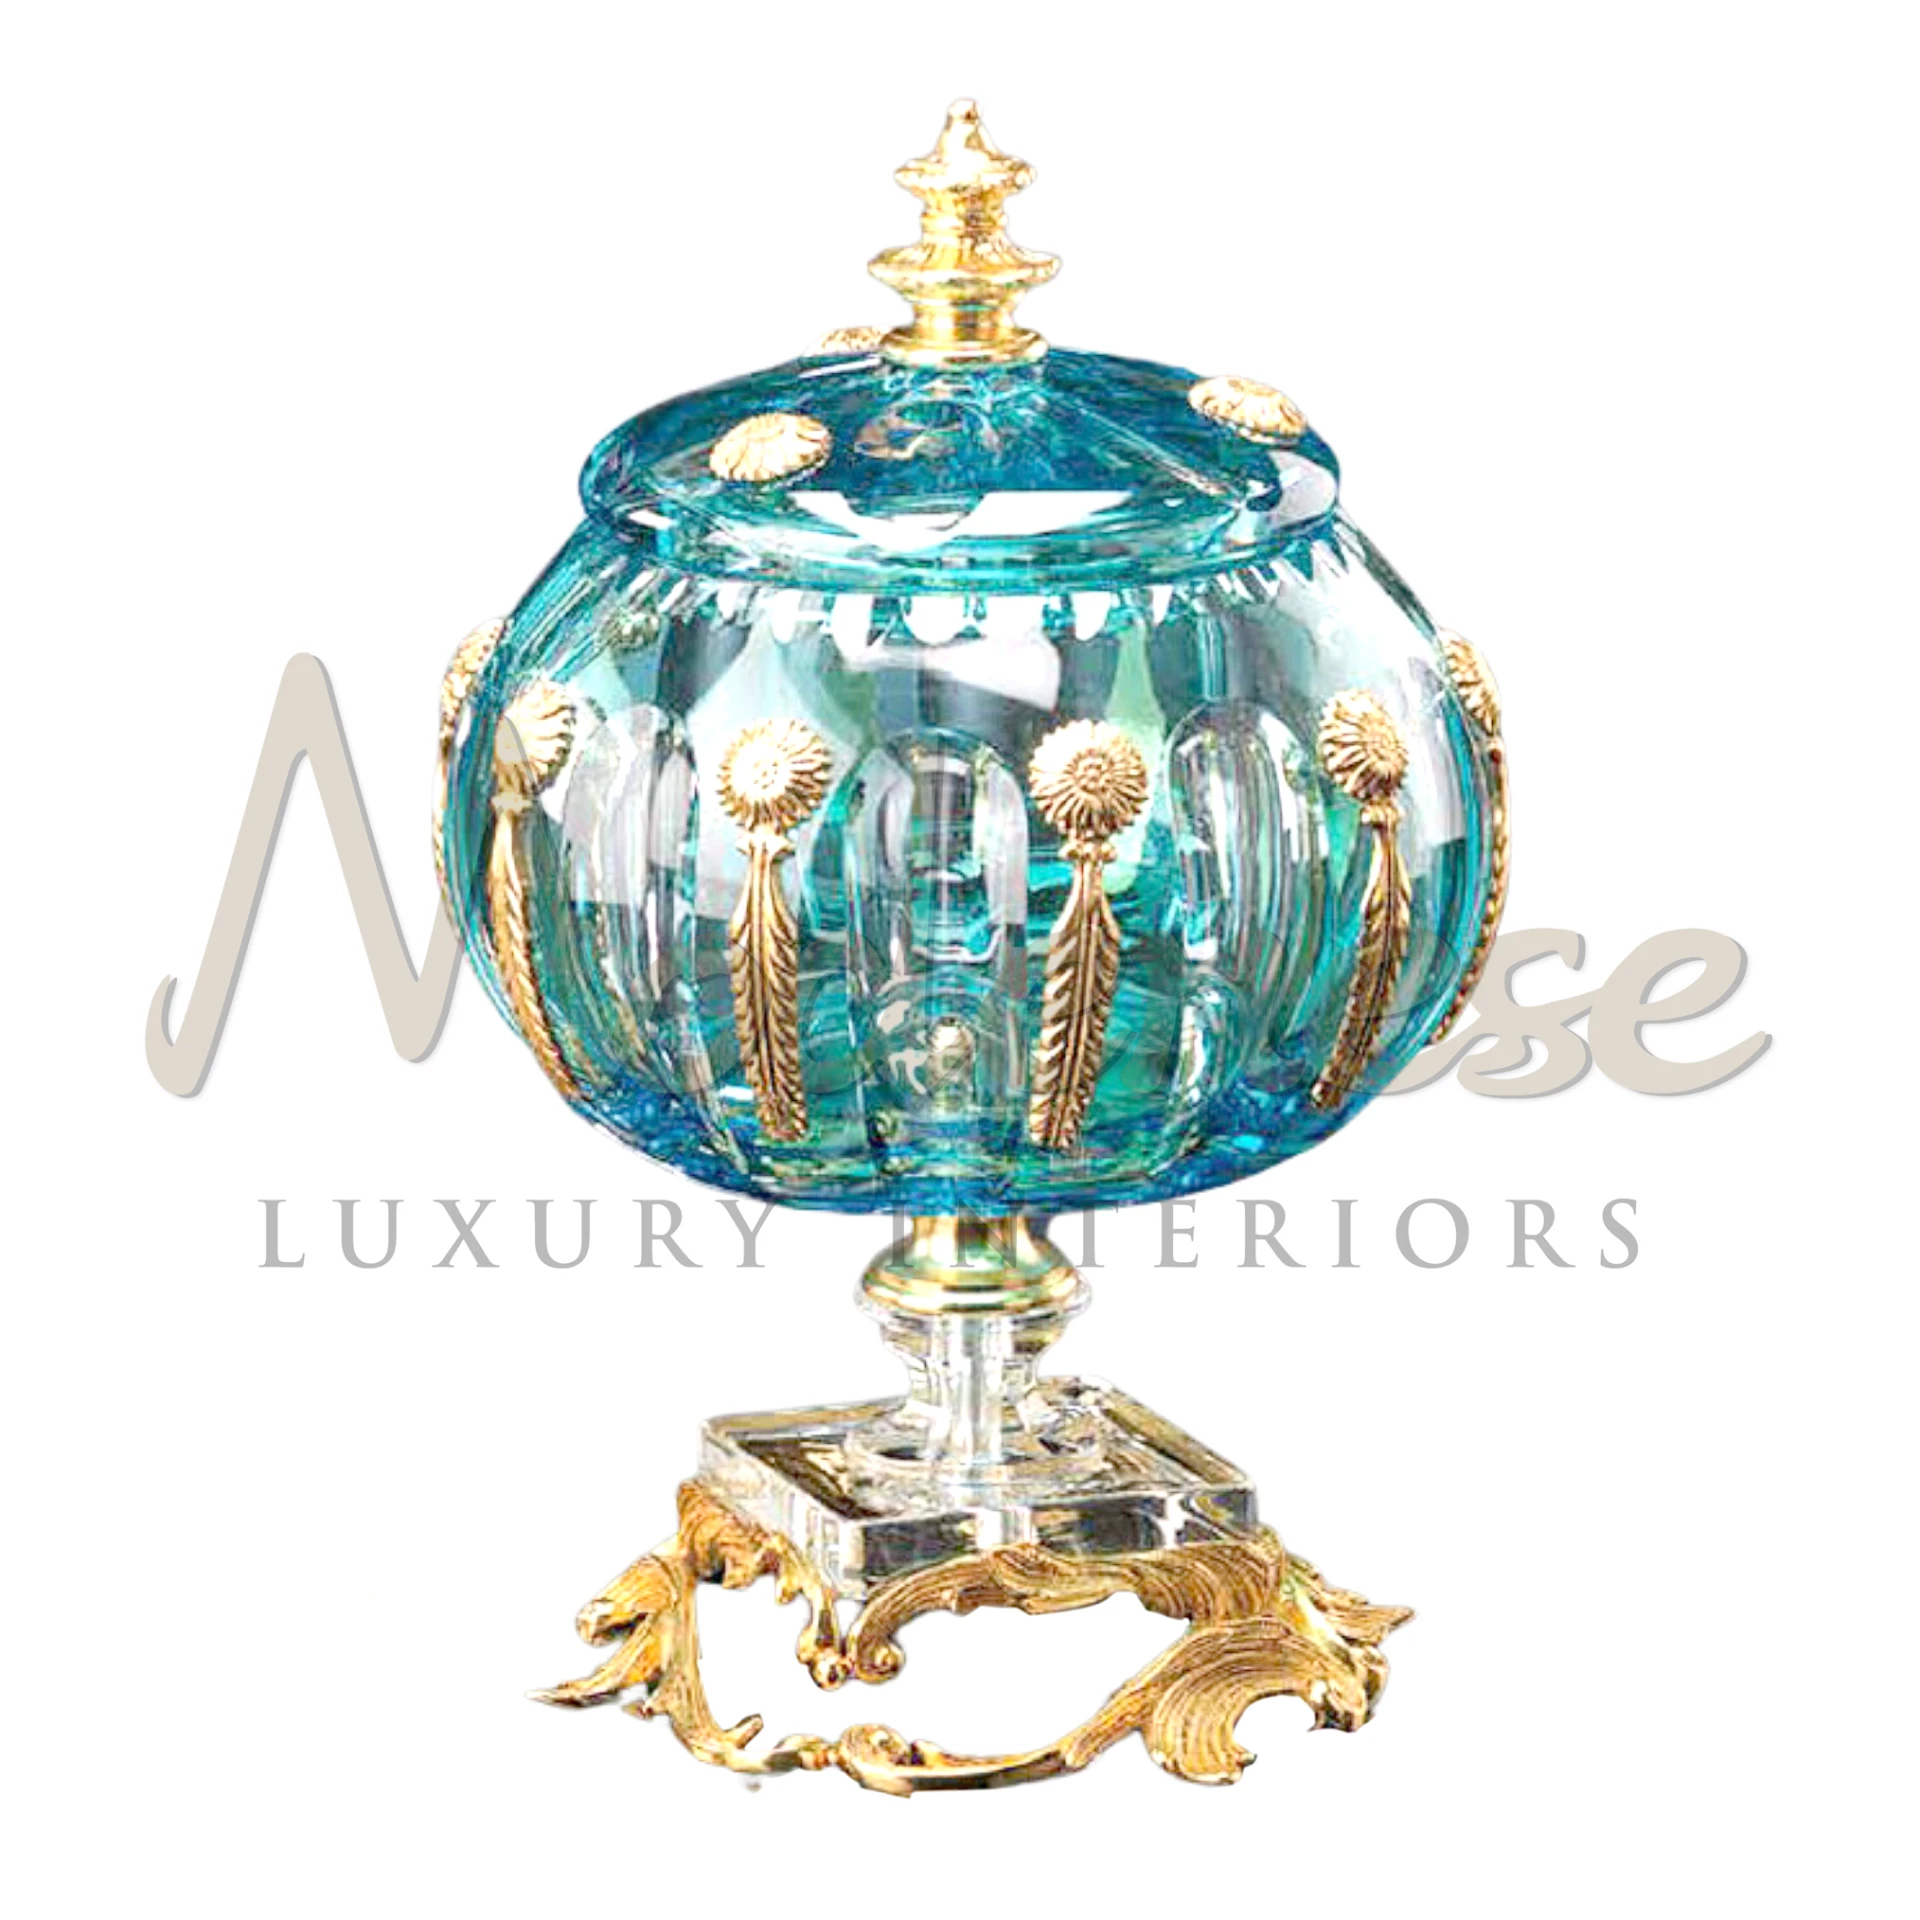 Gorgeous Classical Turquoise Bowl, made from fine porcelain, glass, or crystal, featuring intricate designs, perfect for enhancing luxury and classic interiors.